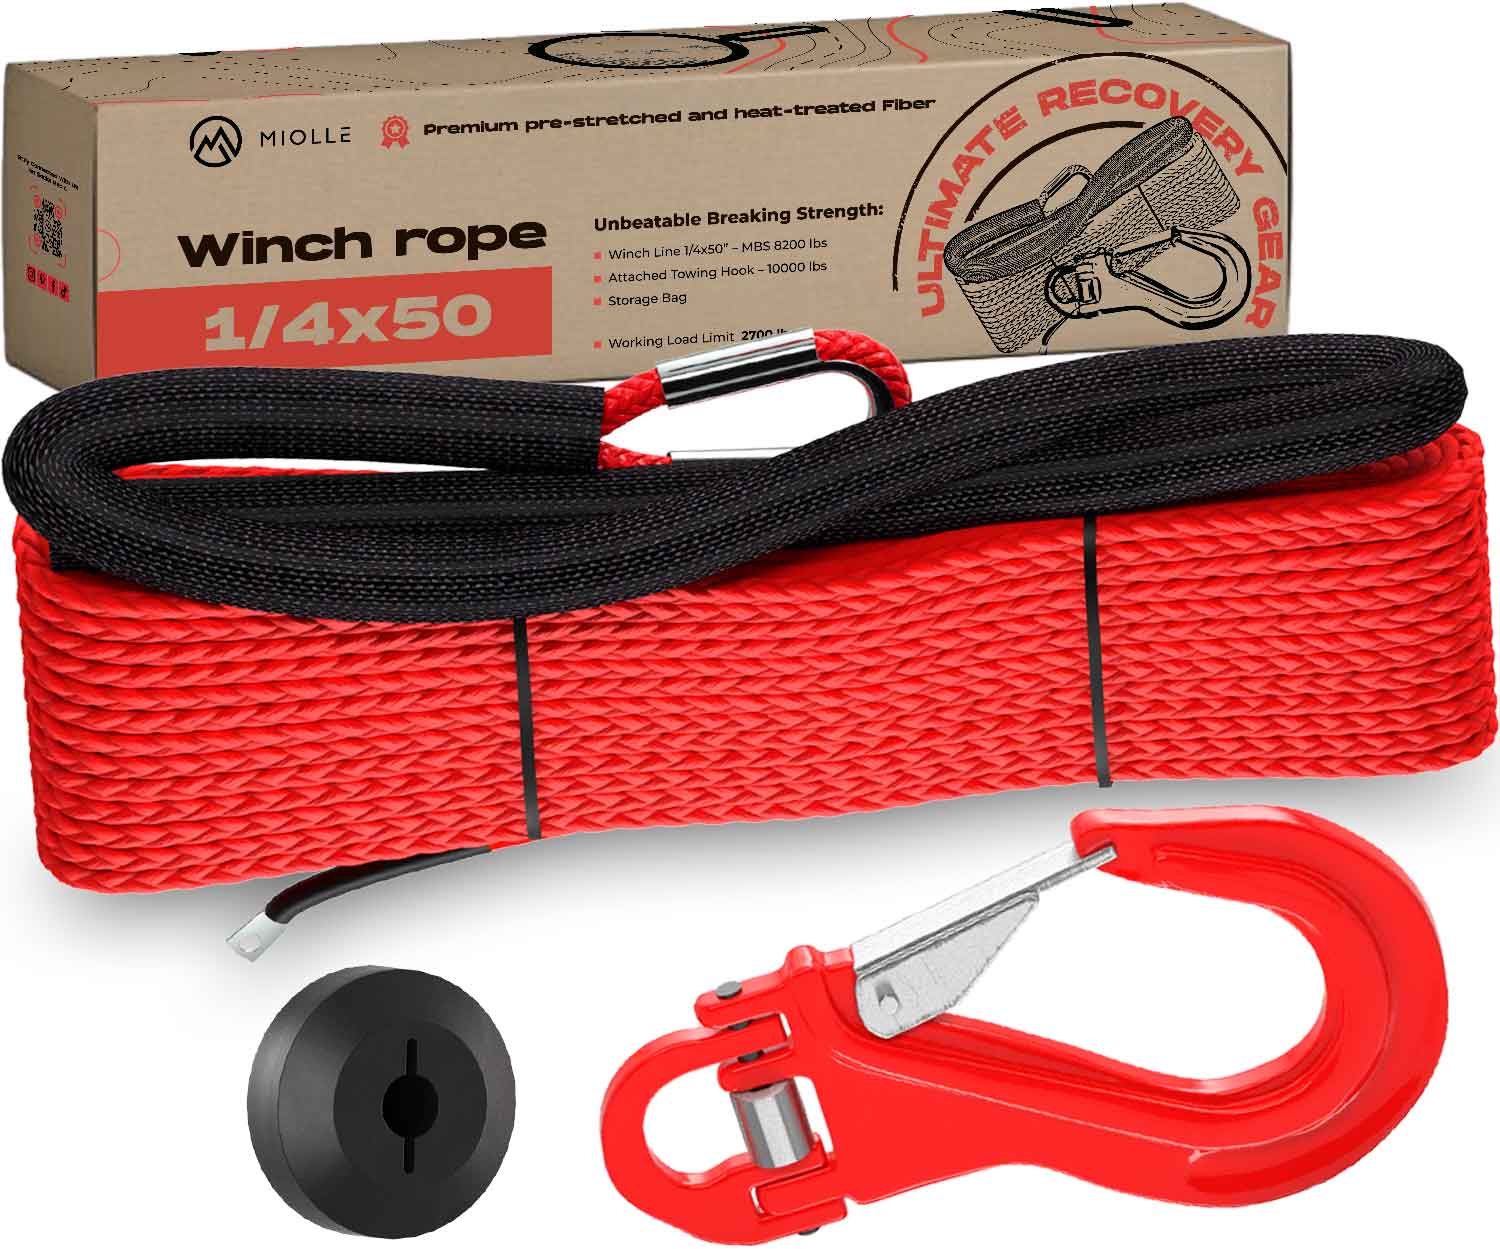 SPARKWHIZ 1/4 x 50' Synthetic Winch Rope Cable 8,200 lbs w/Sleeve